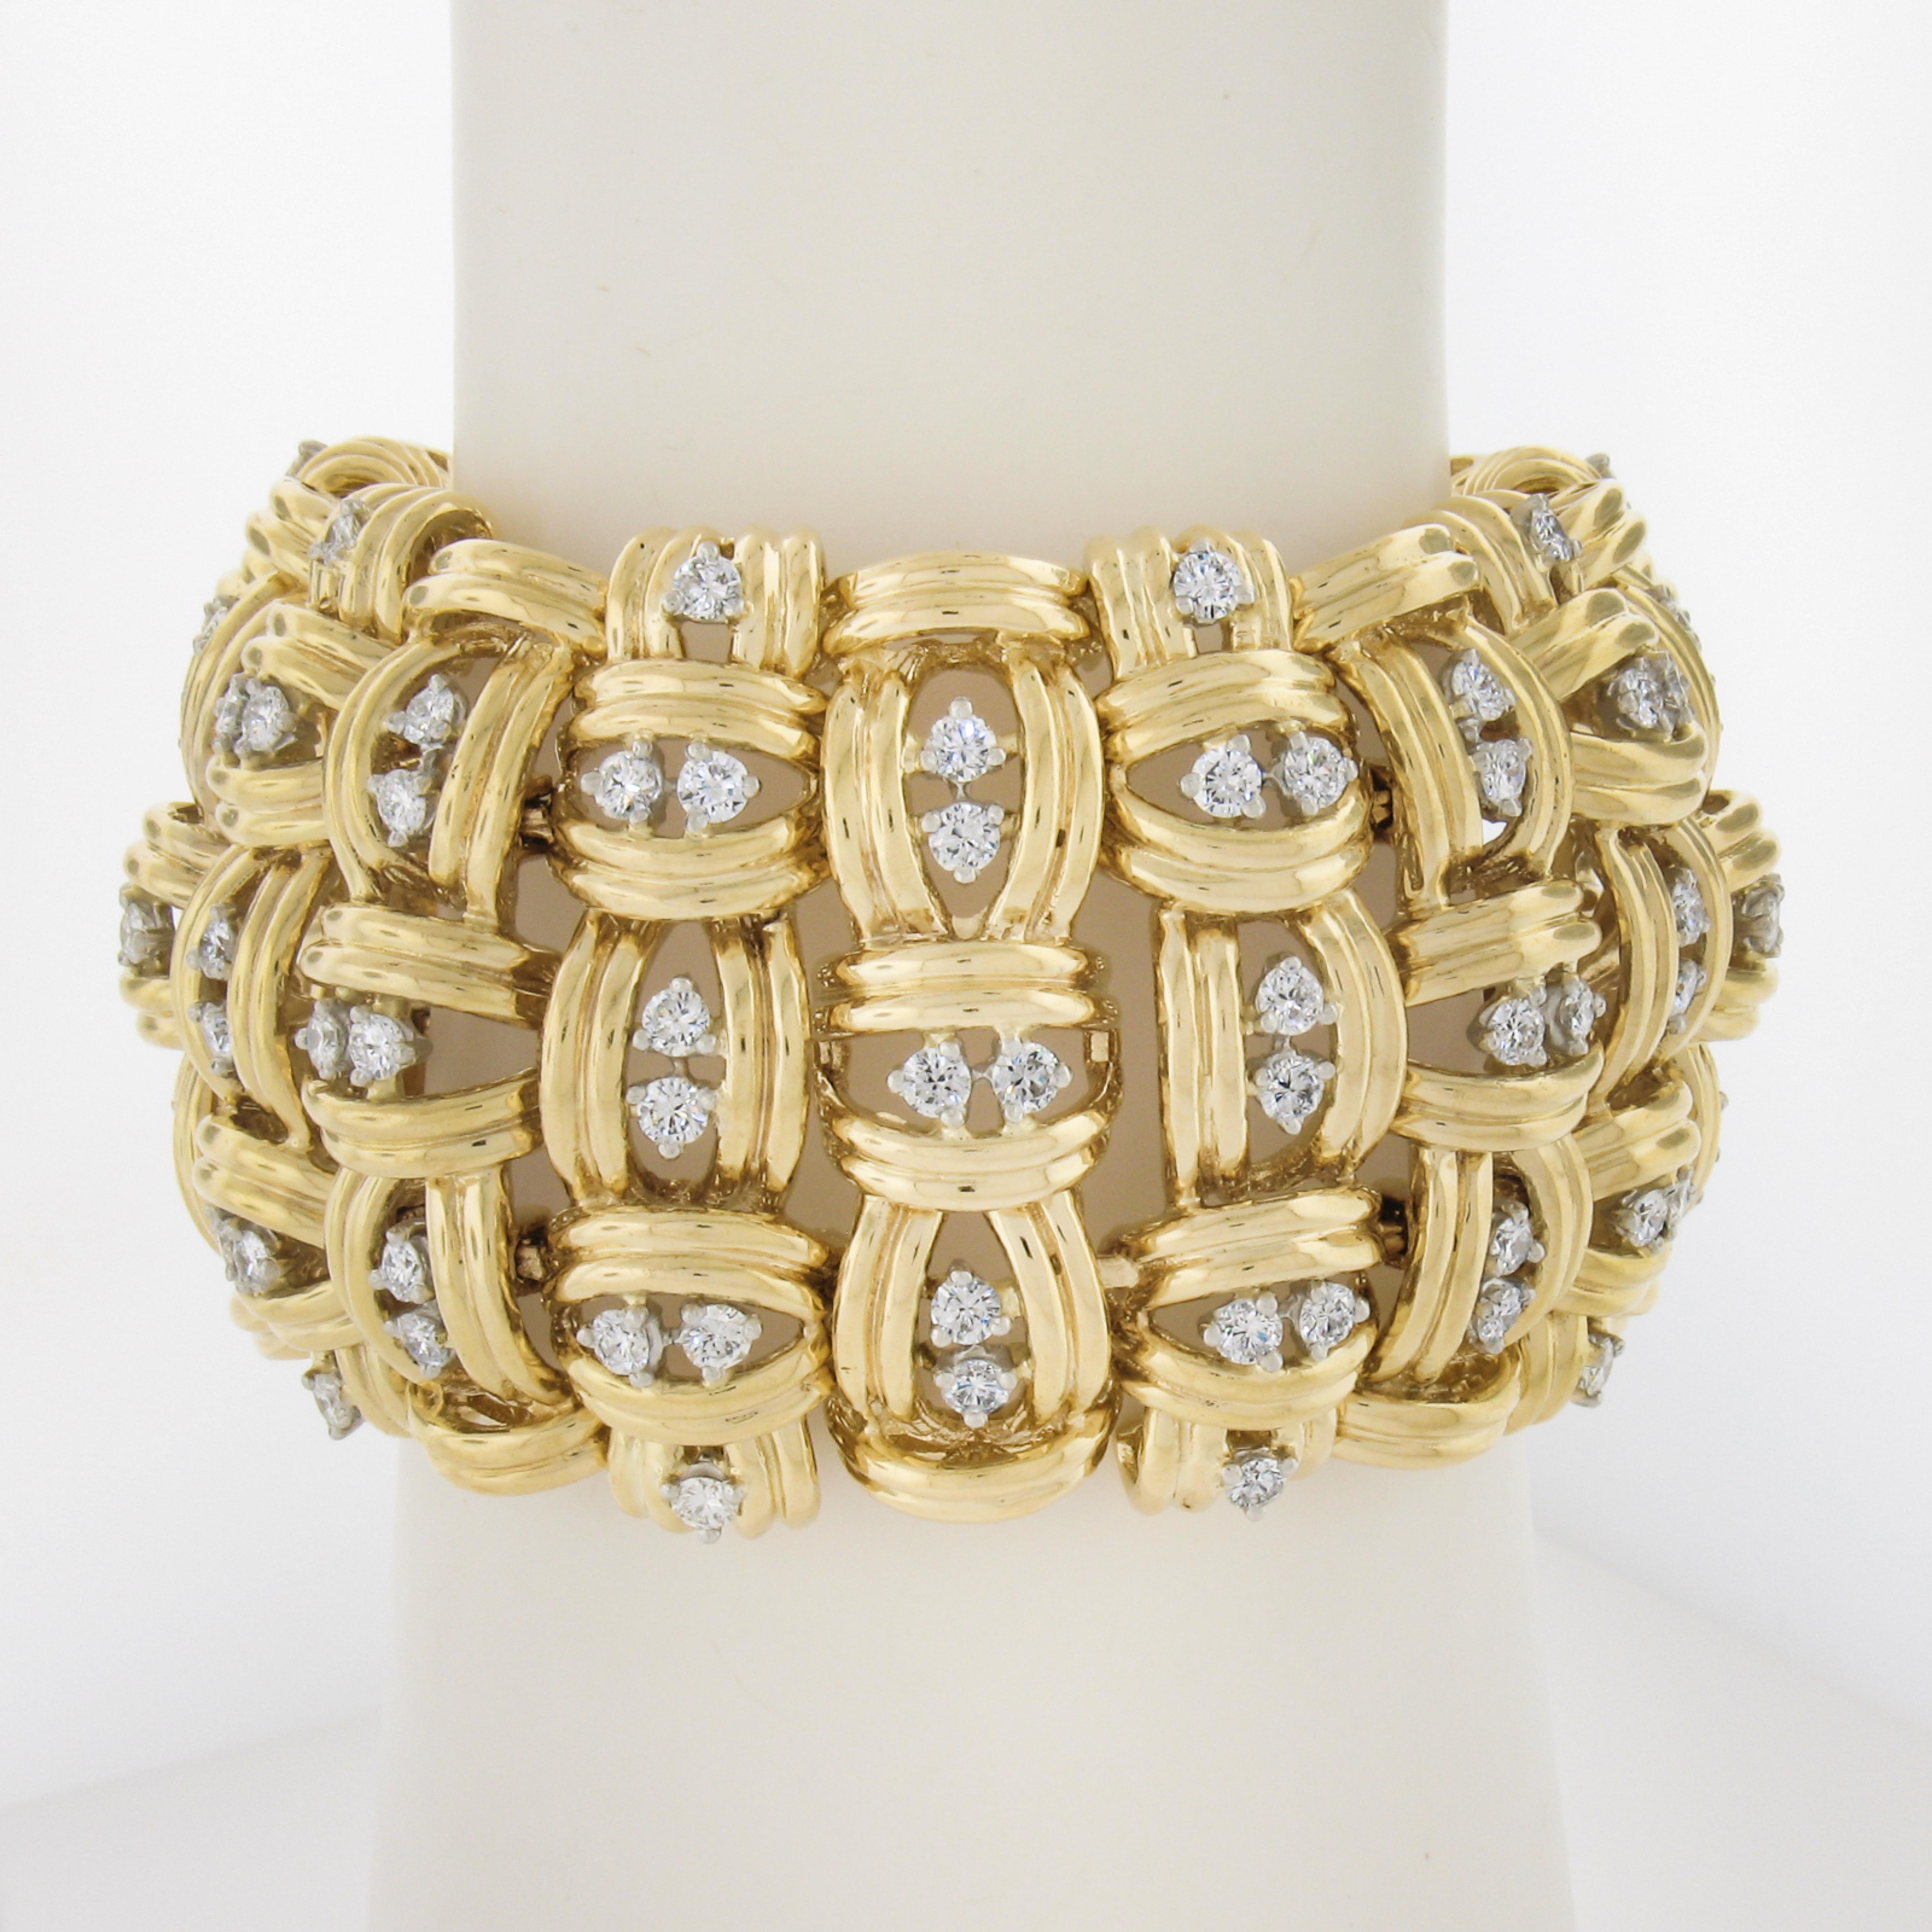 At just under 2in. wide and just under 200 grams of gold - you are looking at a super substantial bracelet! This amazing bracelet is covered in approx. 11ctw of round diamonds and is absolutely NOT for the faint of heart! Enjoy!

--Stones:--
126